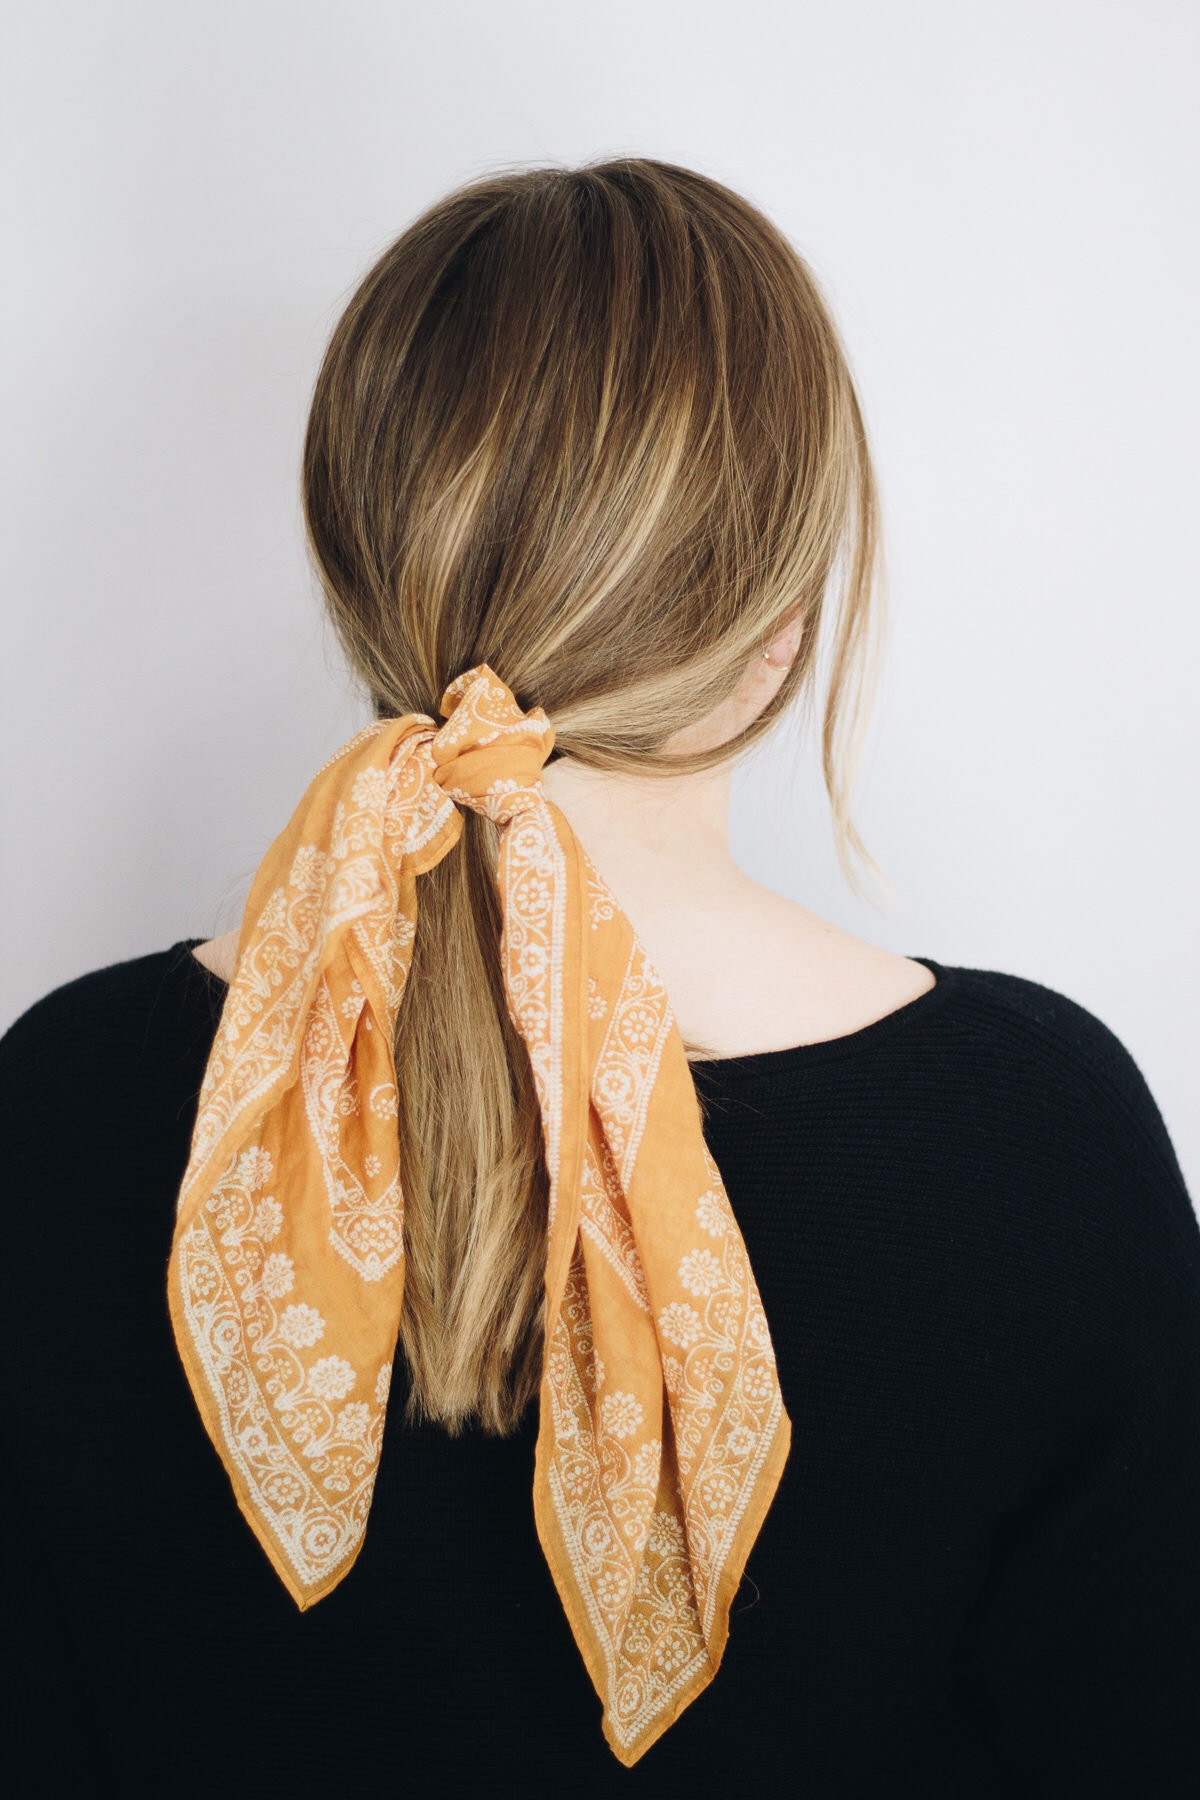 5-Minute Hairstyles for the Girl On-the-Go